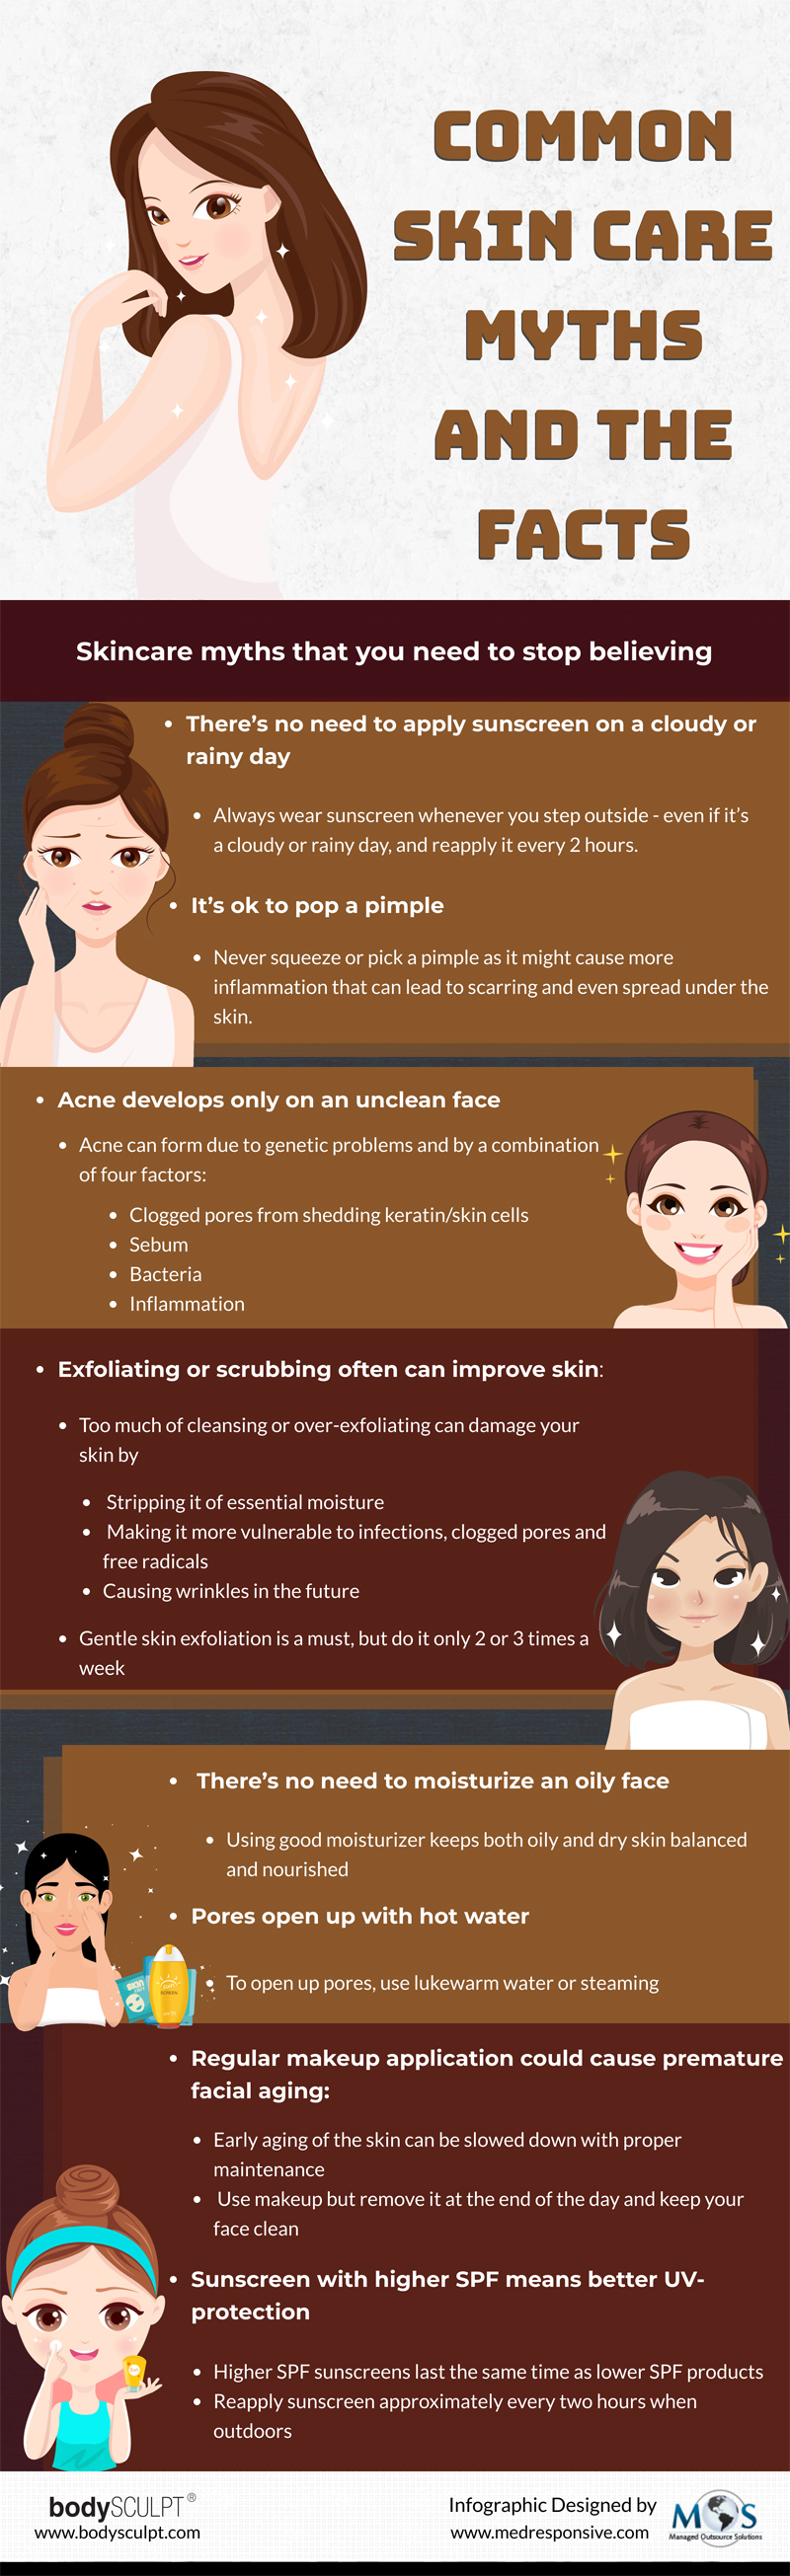 Skin Care Myths and the Facts